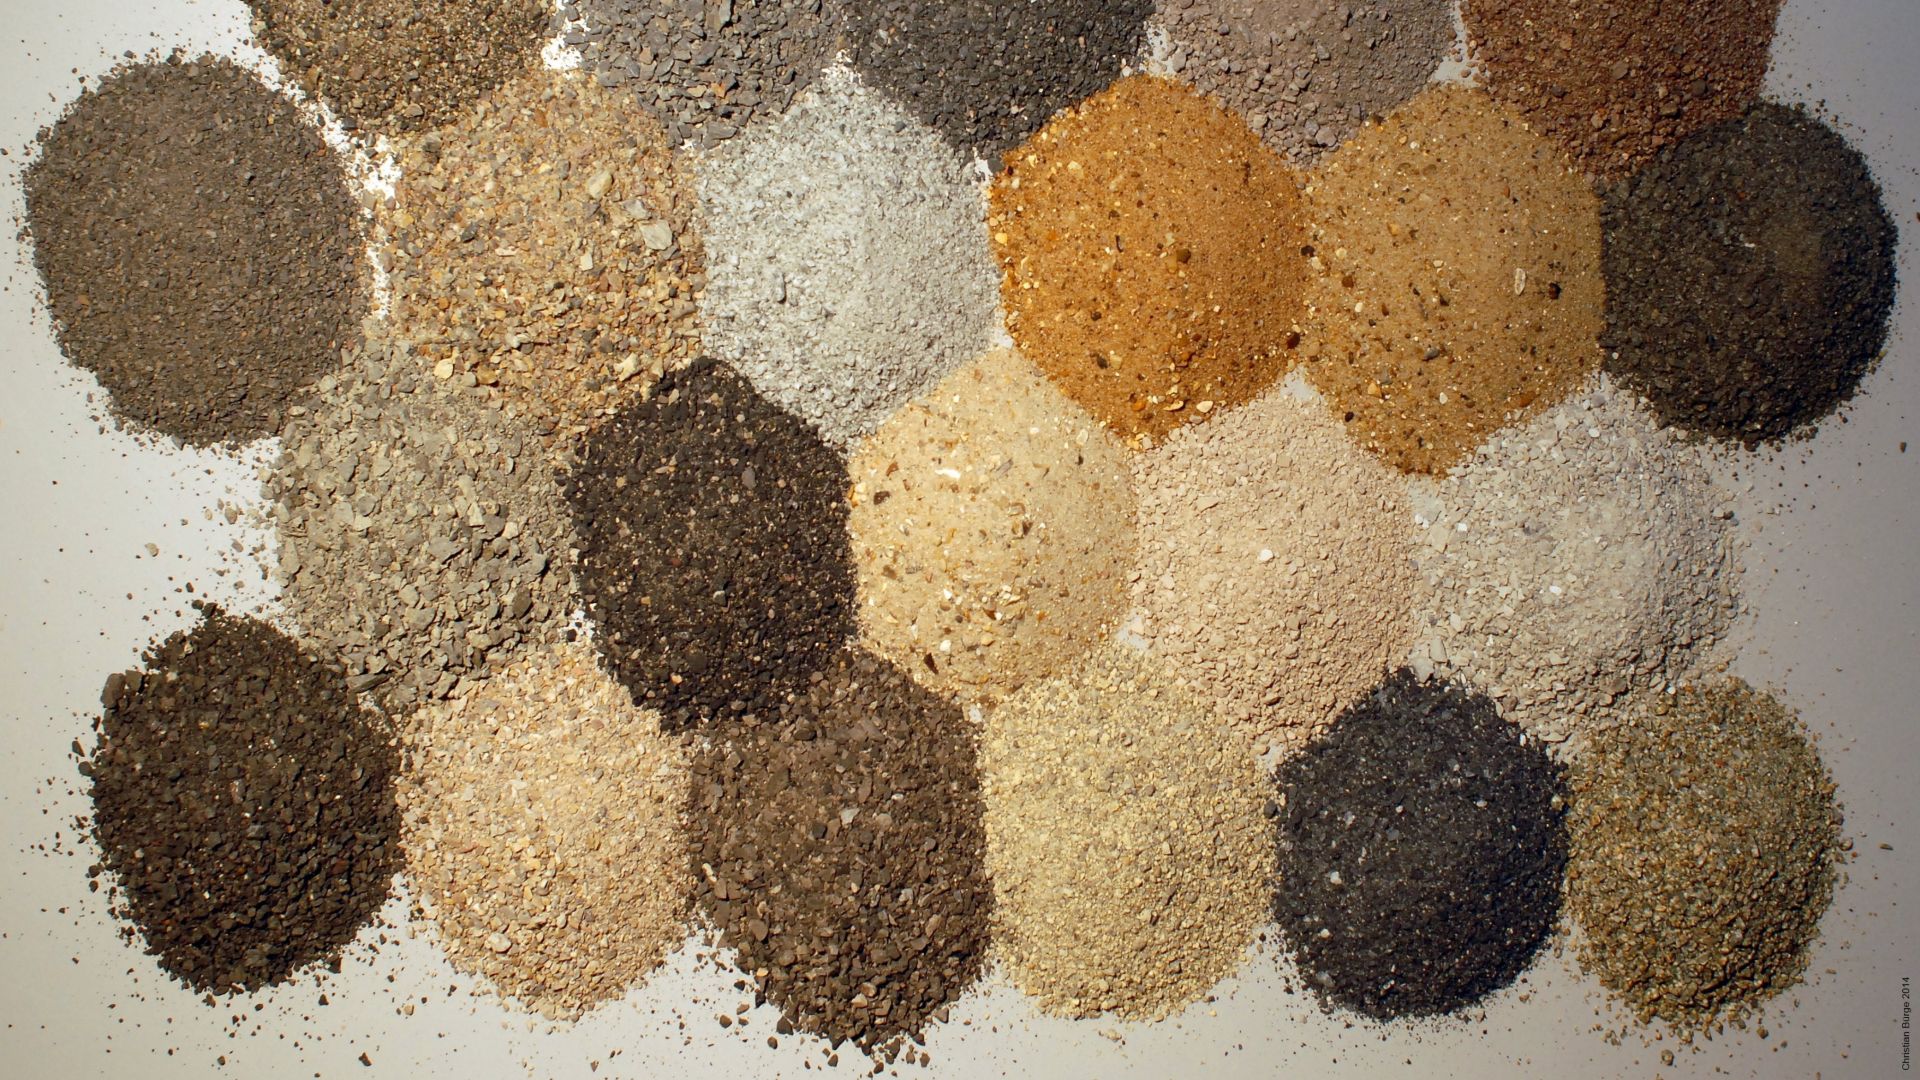 Many various types of sand are used for concrete formulation